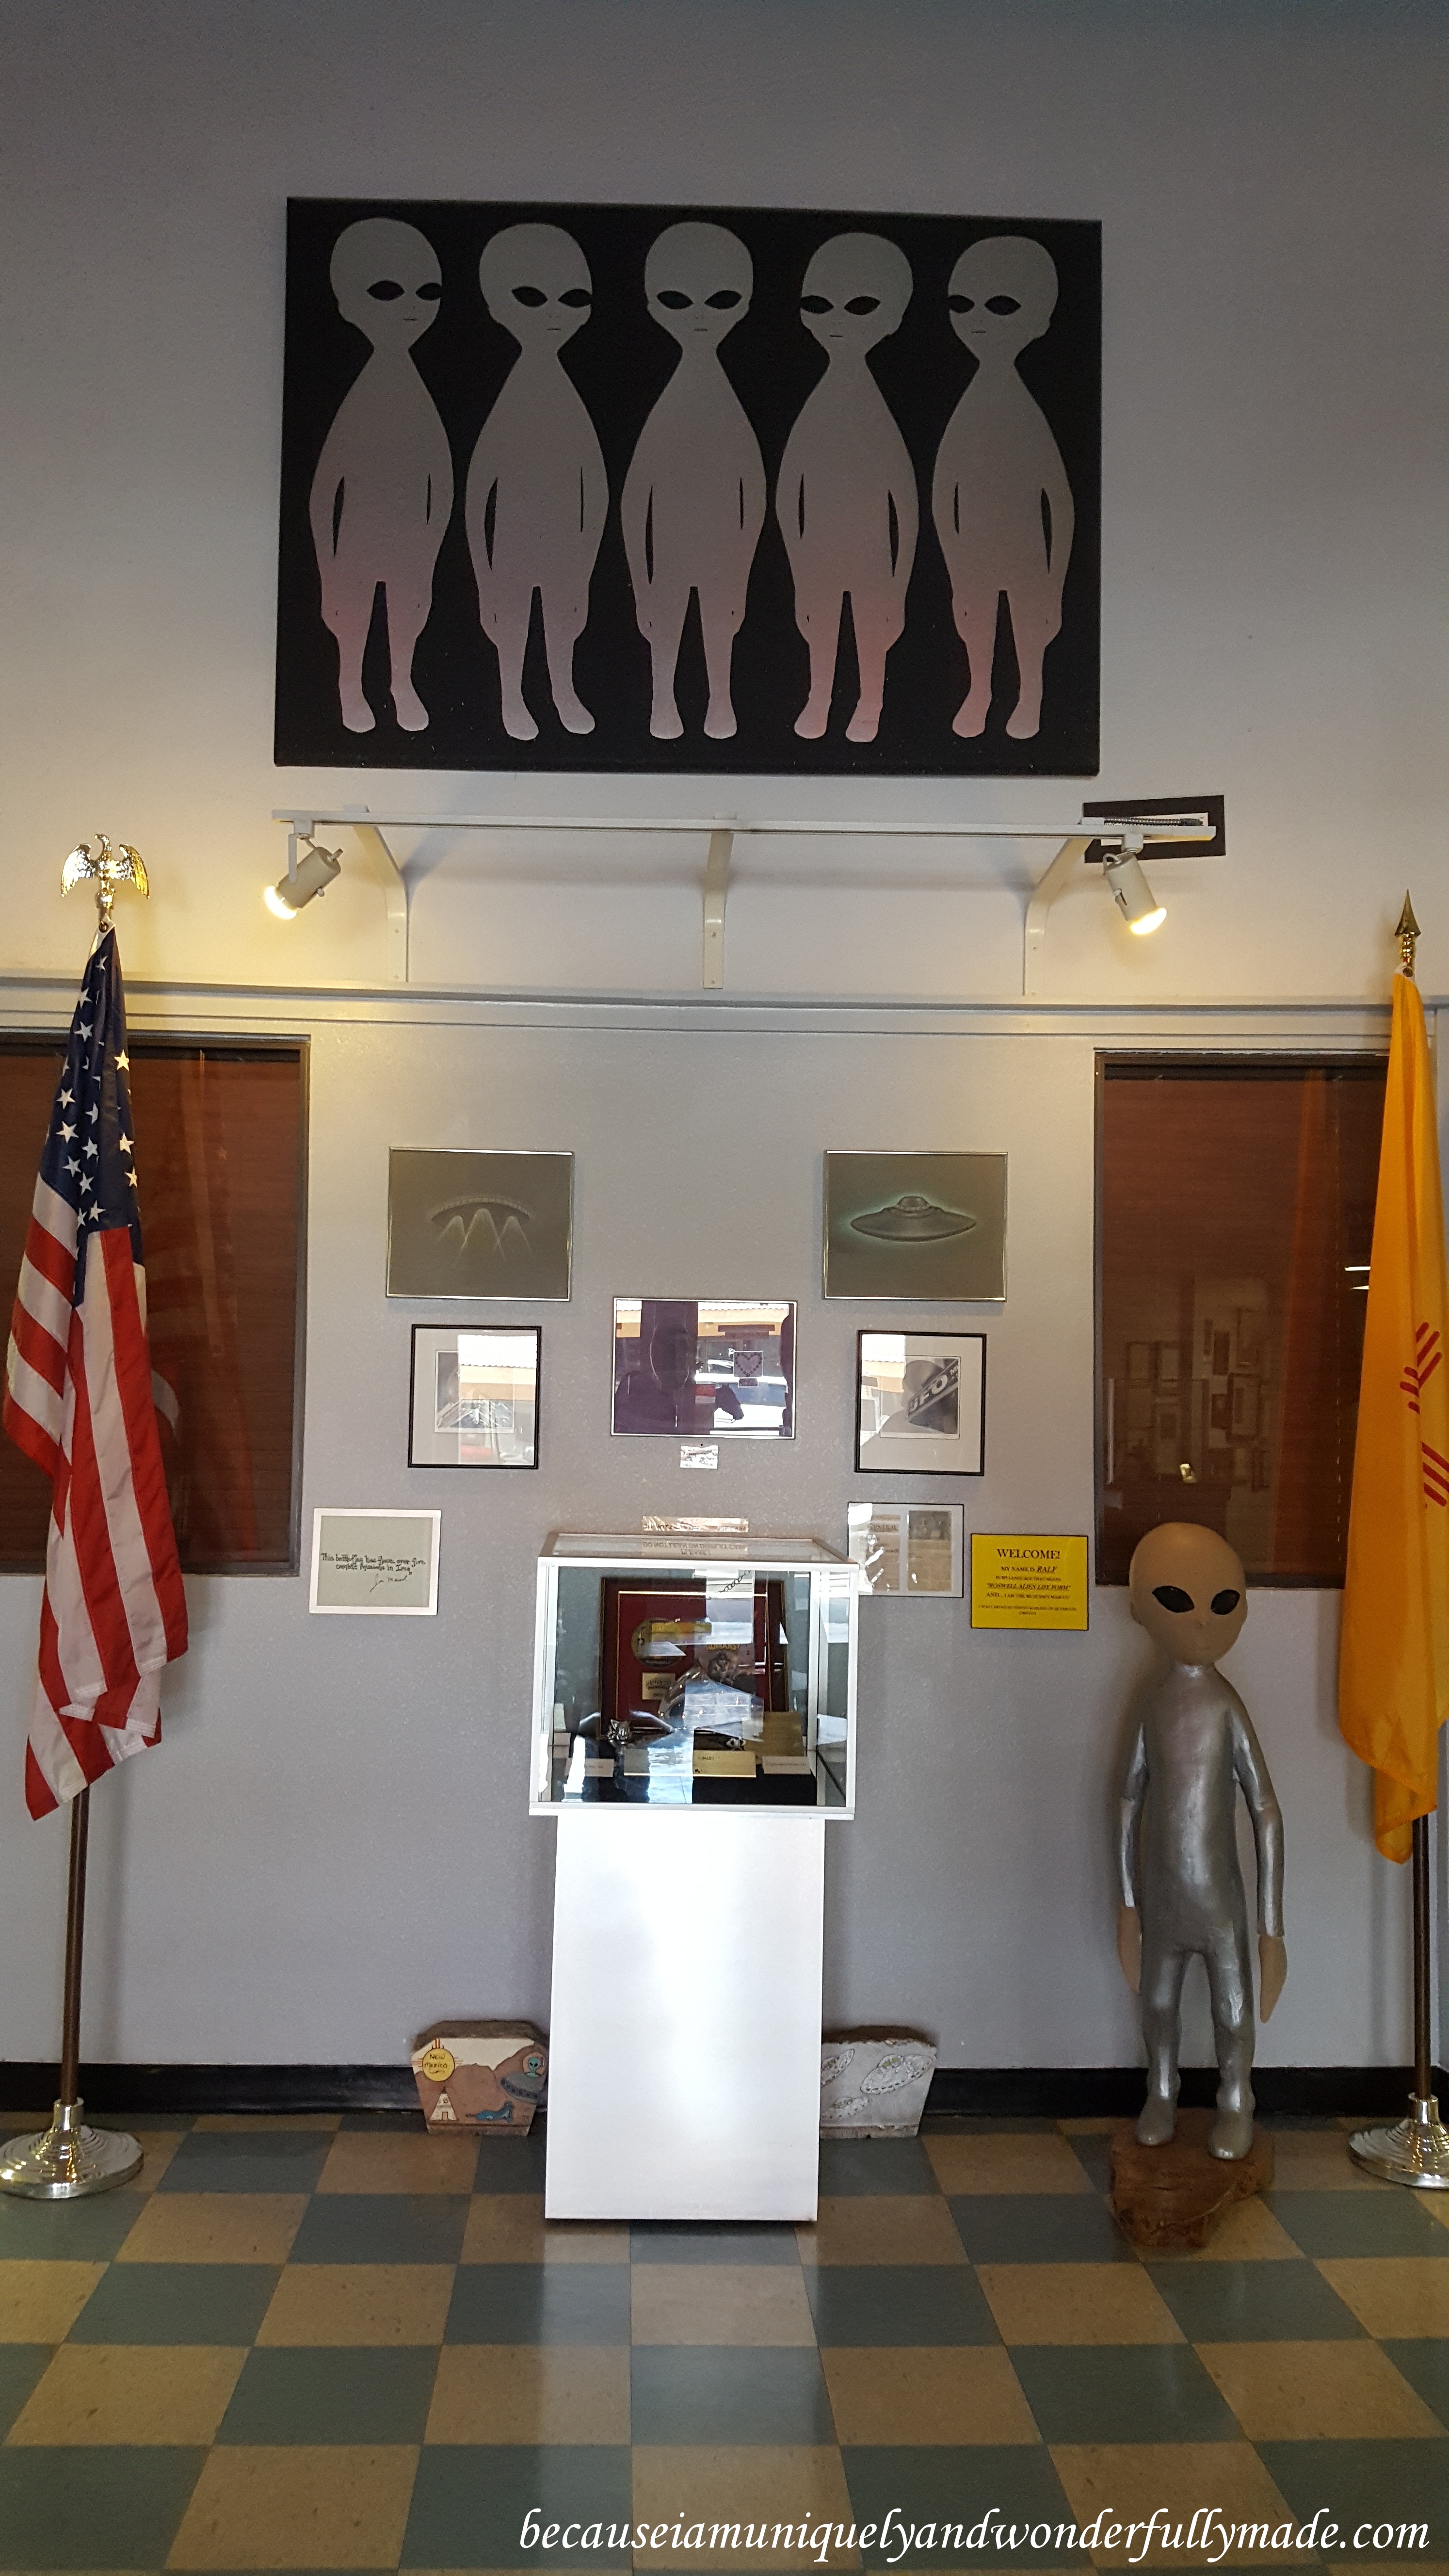 Welcome to International UFO Museum and Research Center in Roswell, New Mexico!